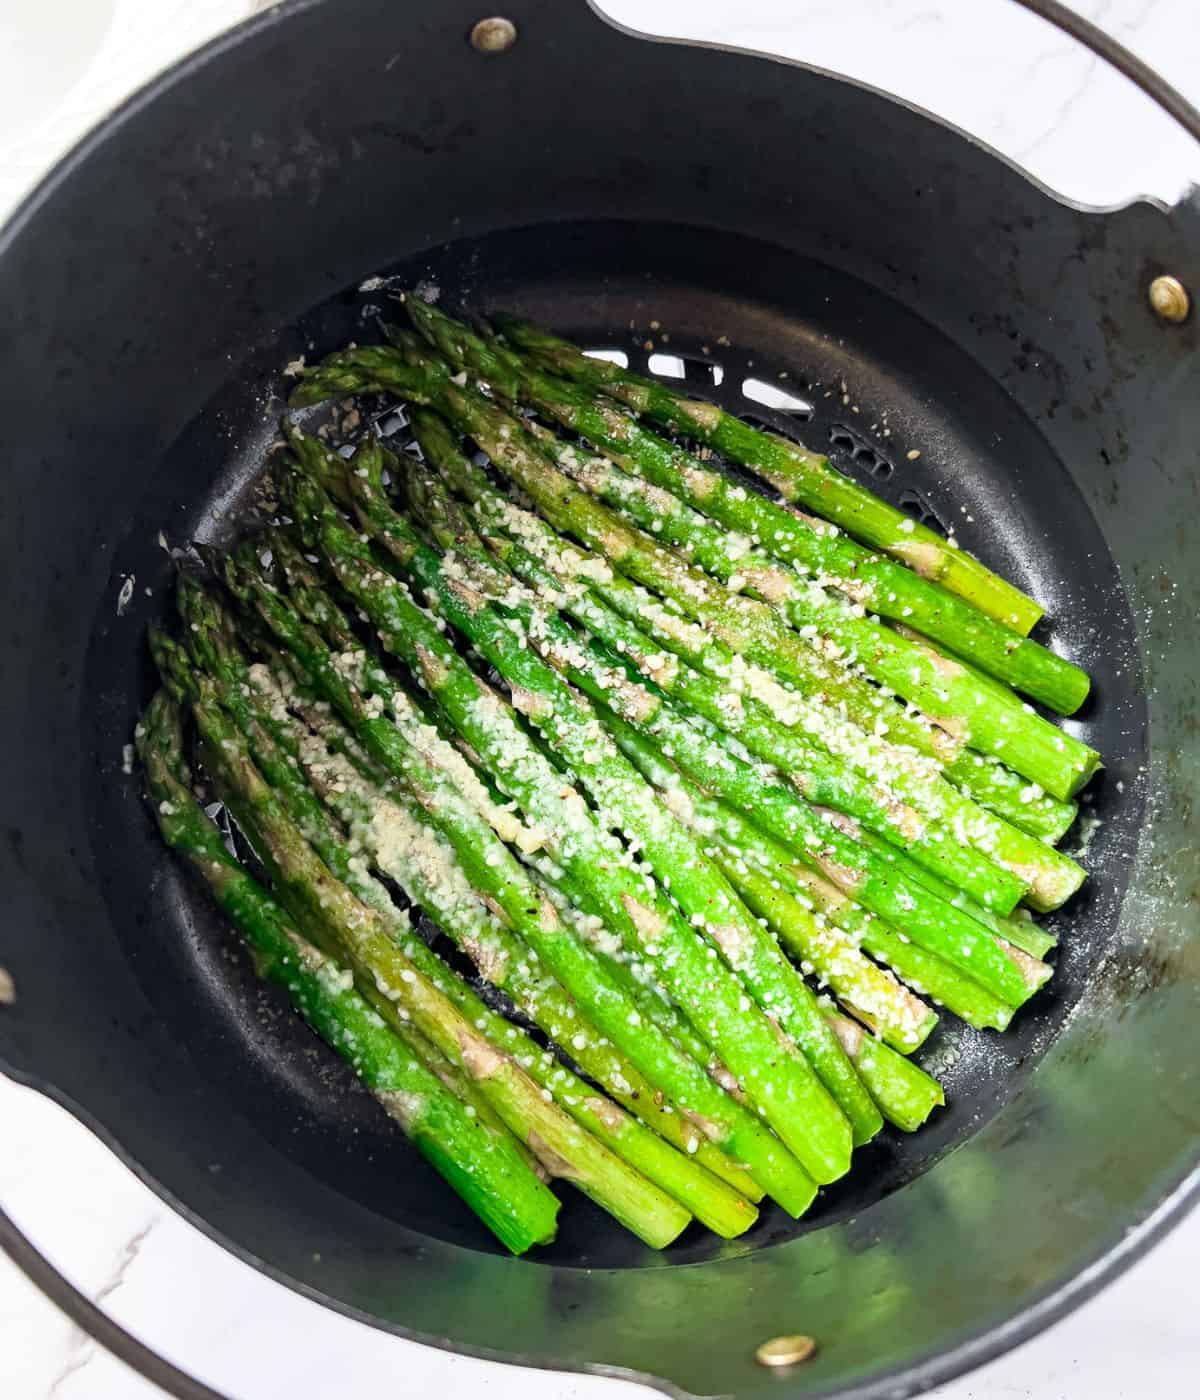 Cooked asparagus in an air-fryer basket.